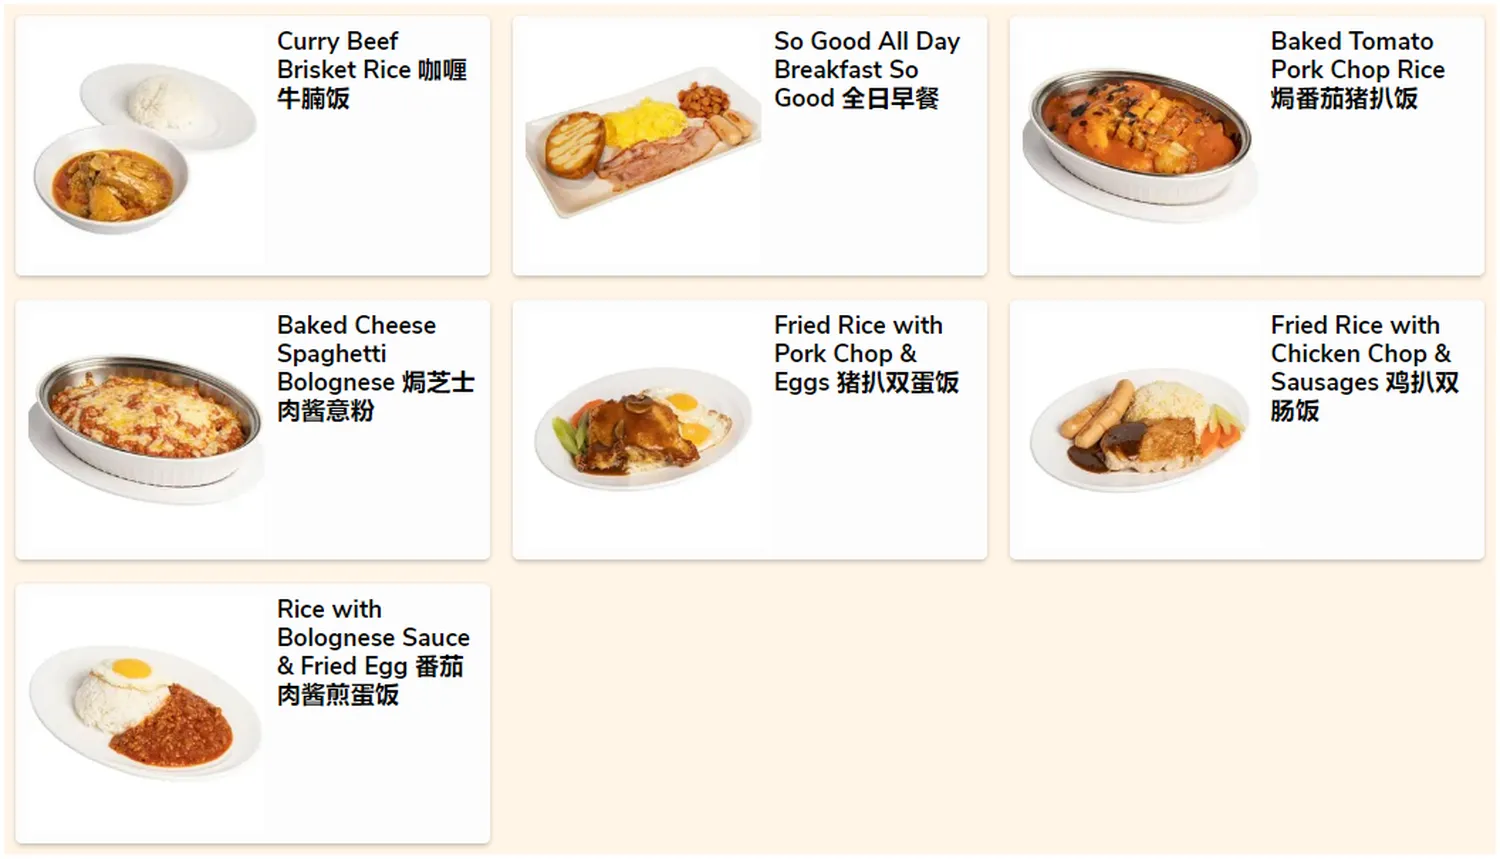 so good char chan tang menu singapore chef recommendations